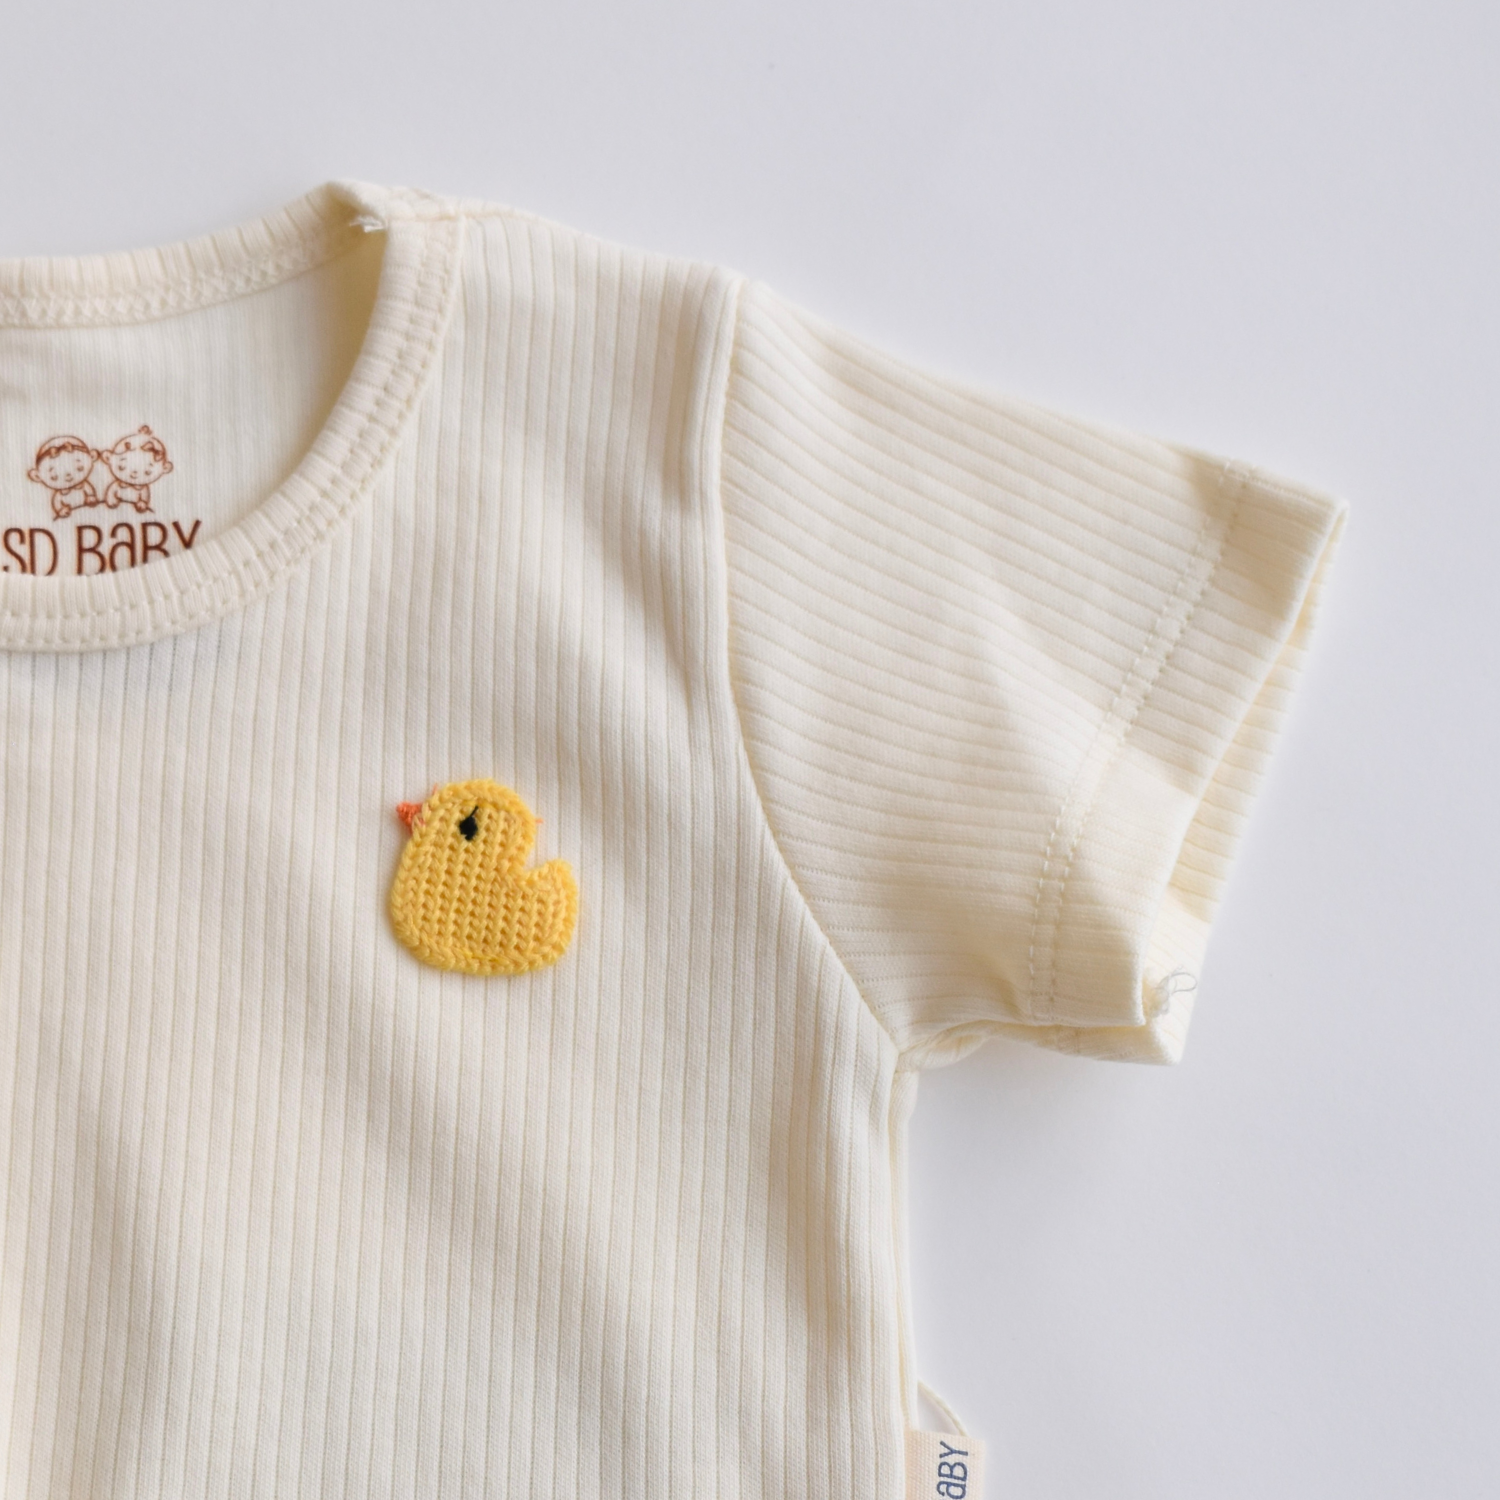 Ducky Delight Baby Casual Set